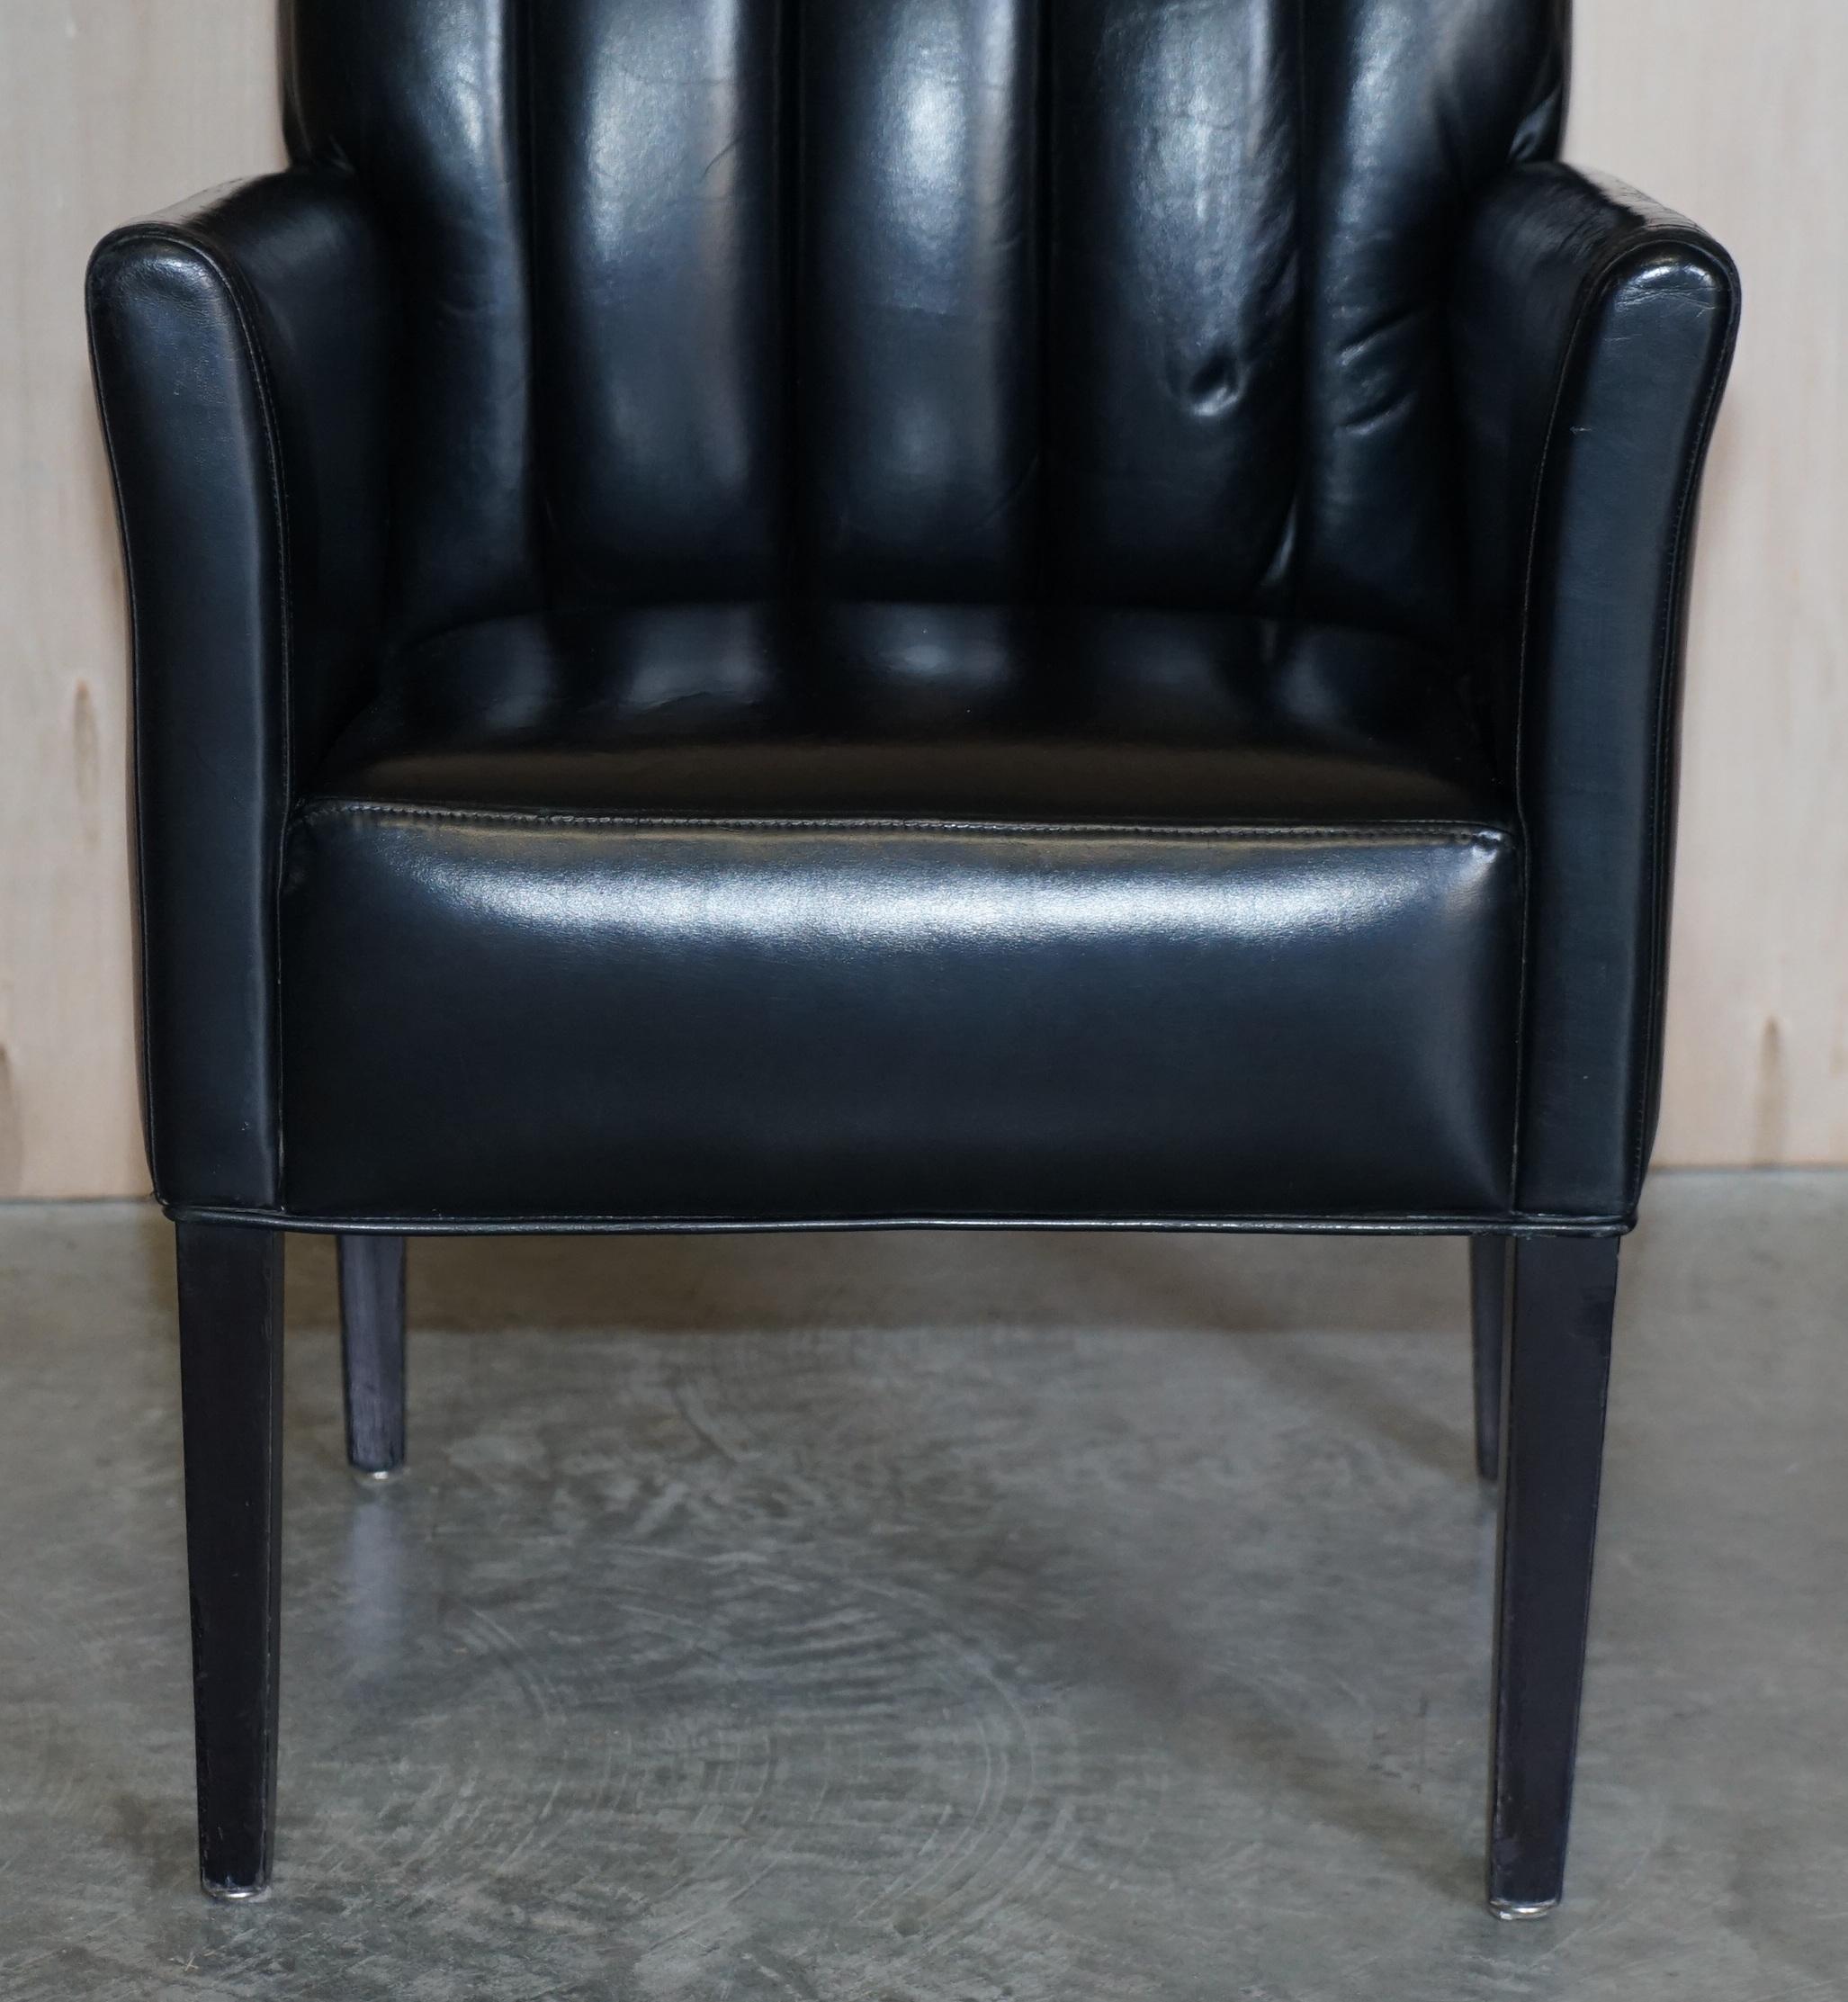 Pair of Restored Art Deco Mid-Century Modern Style Fluted Back Leather Armchair For Sale 4